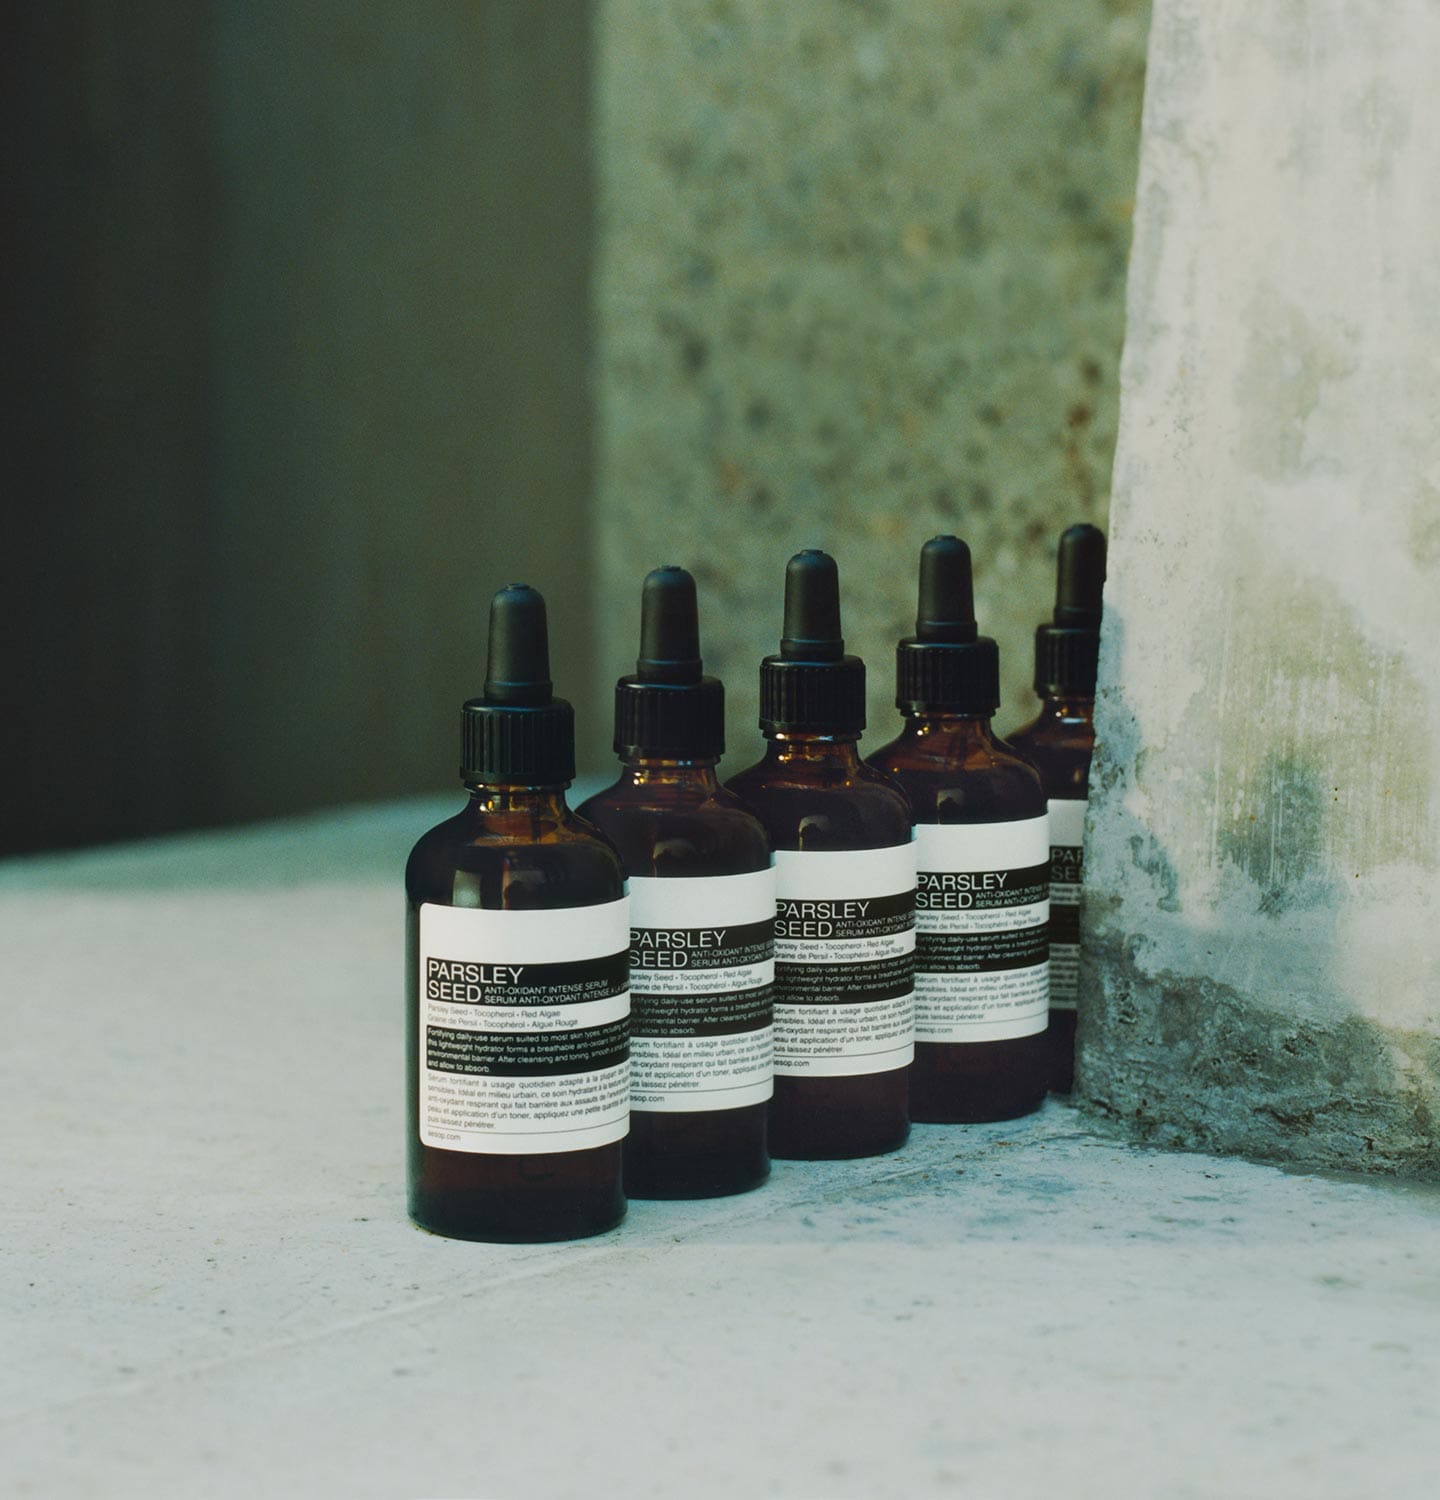 Aesop Parsley Seed Anti-Oxidant Intense Serum bottles lined up next to a concrete wall